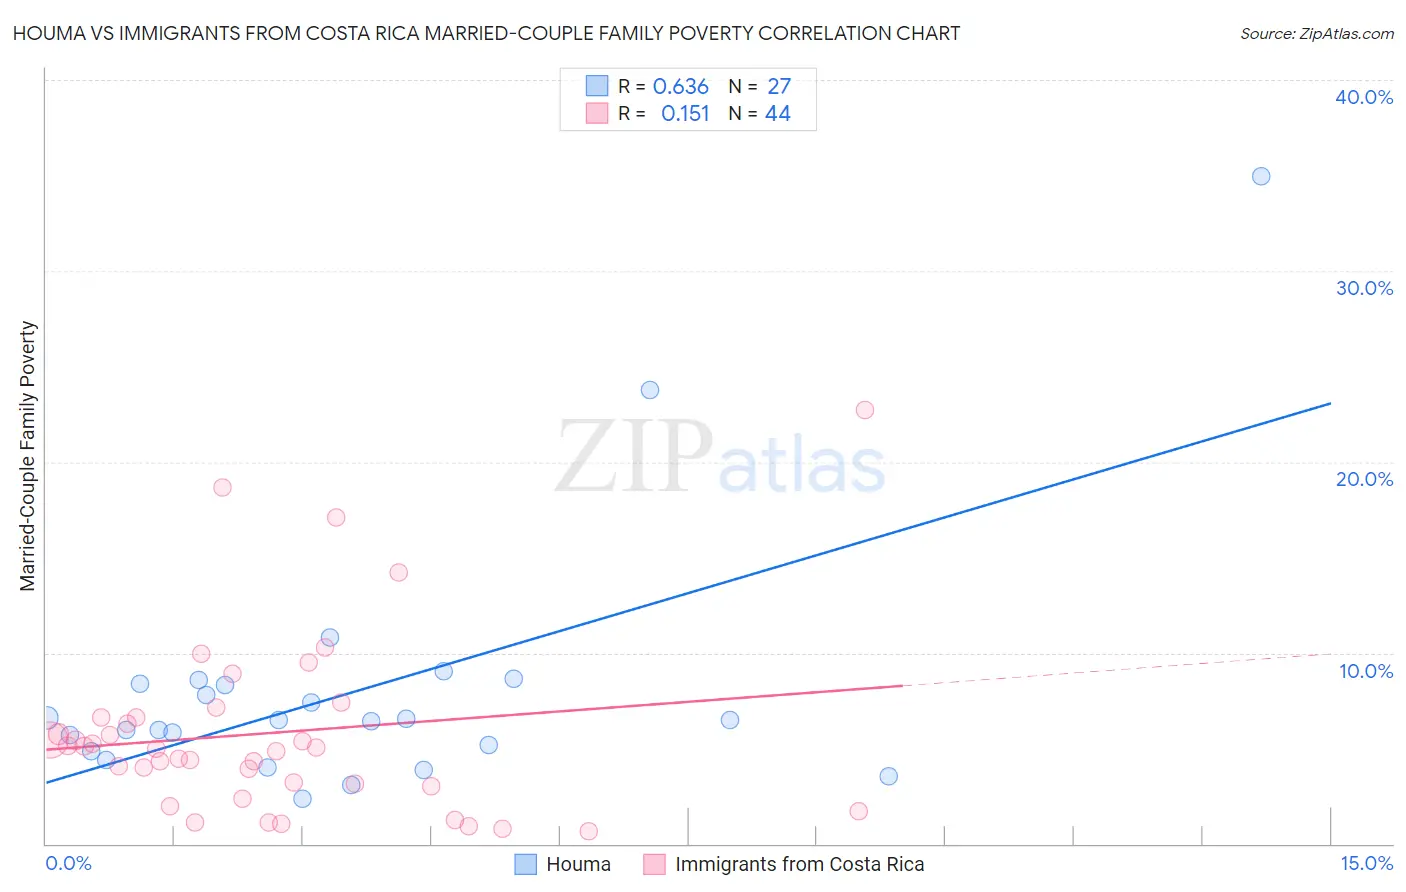 Houma vs Immigrants from Costa Rica Married-Couple Family Poverty